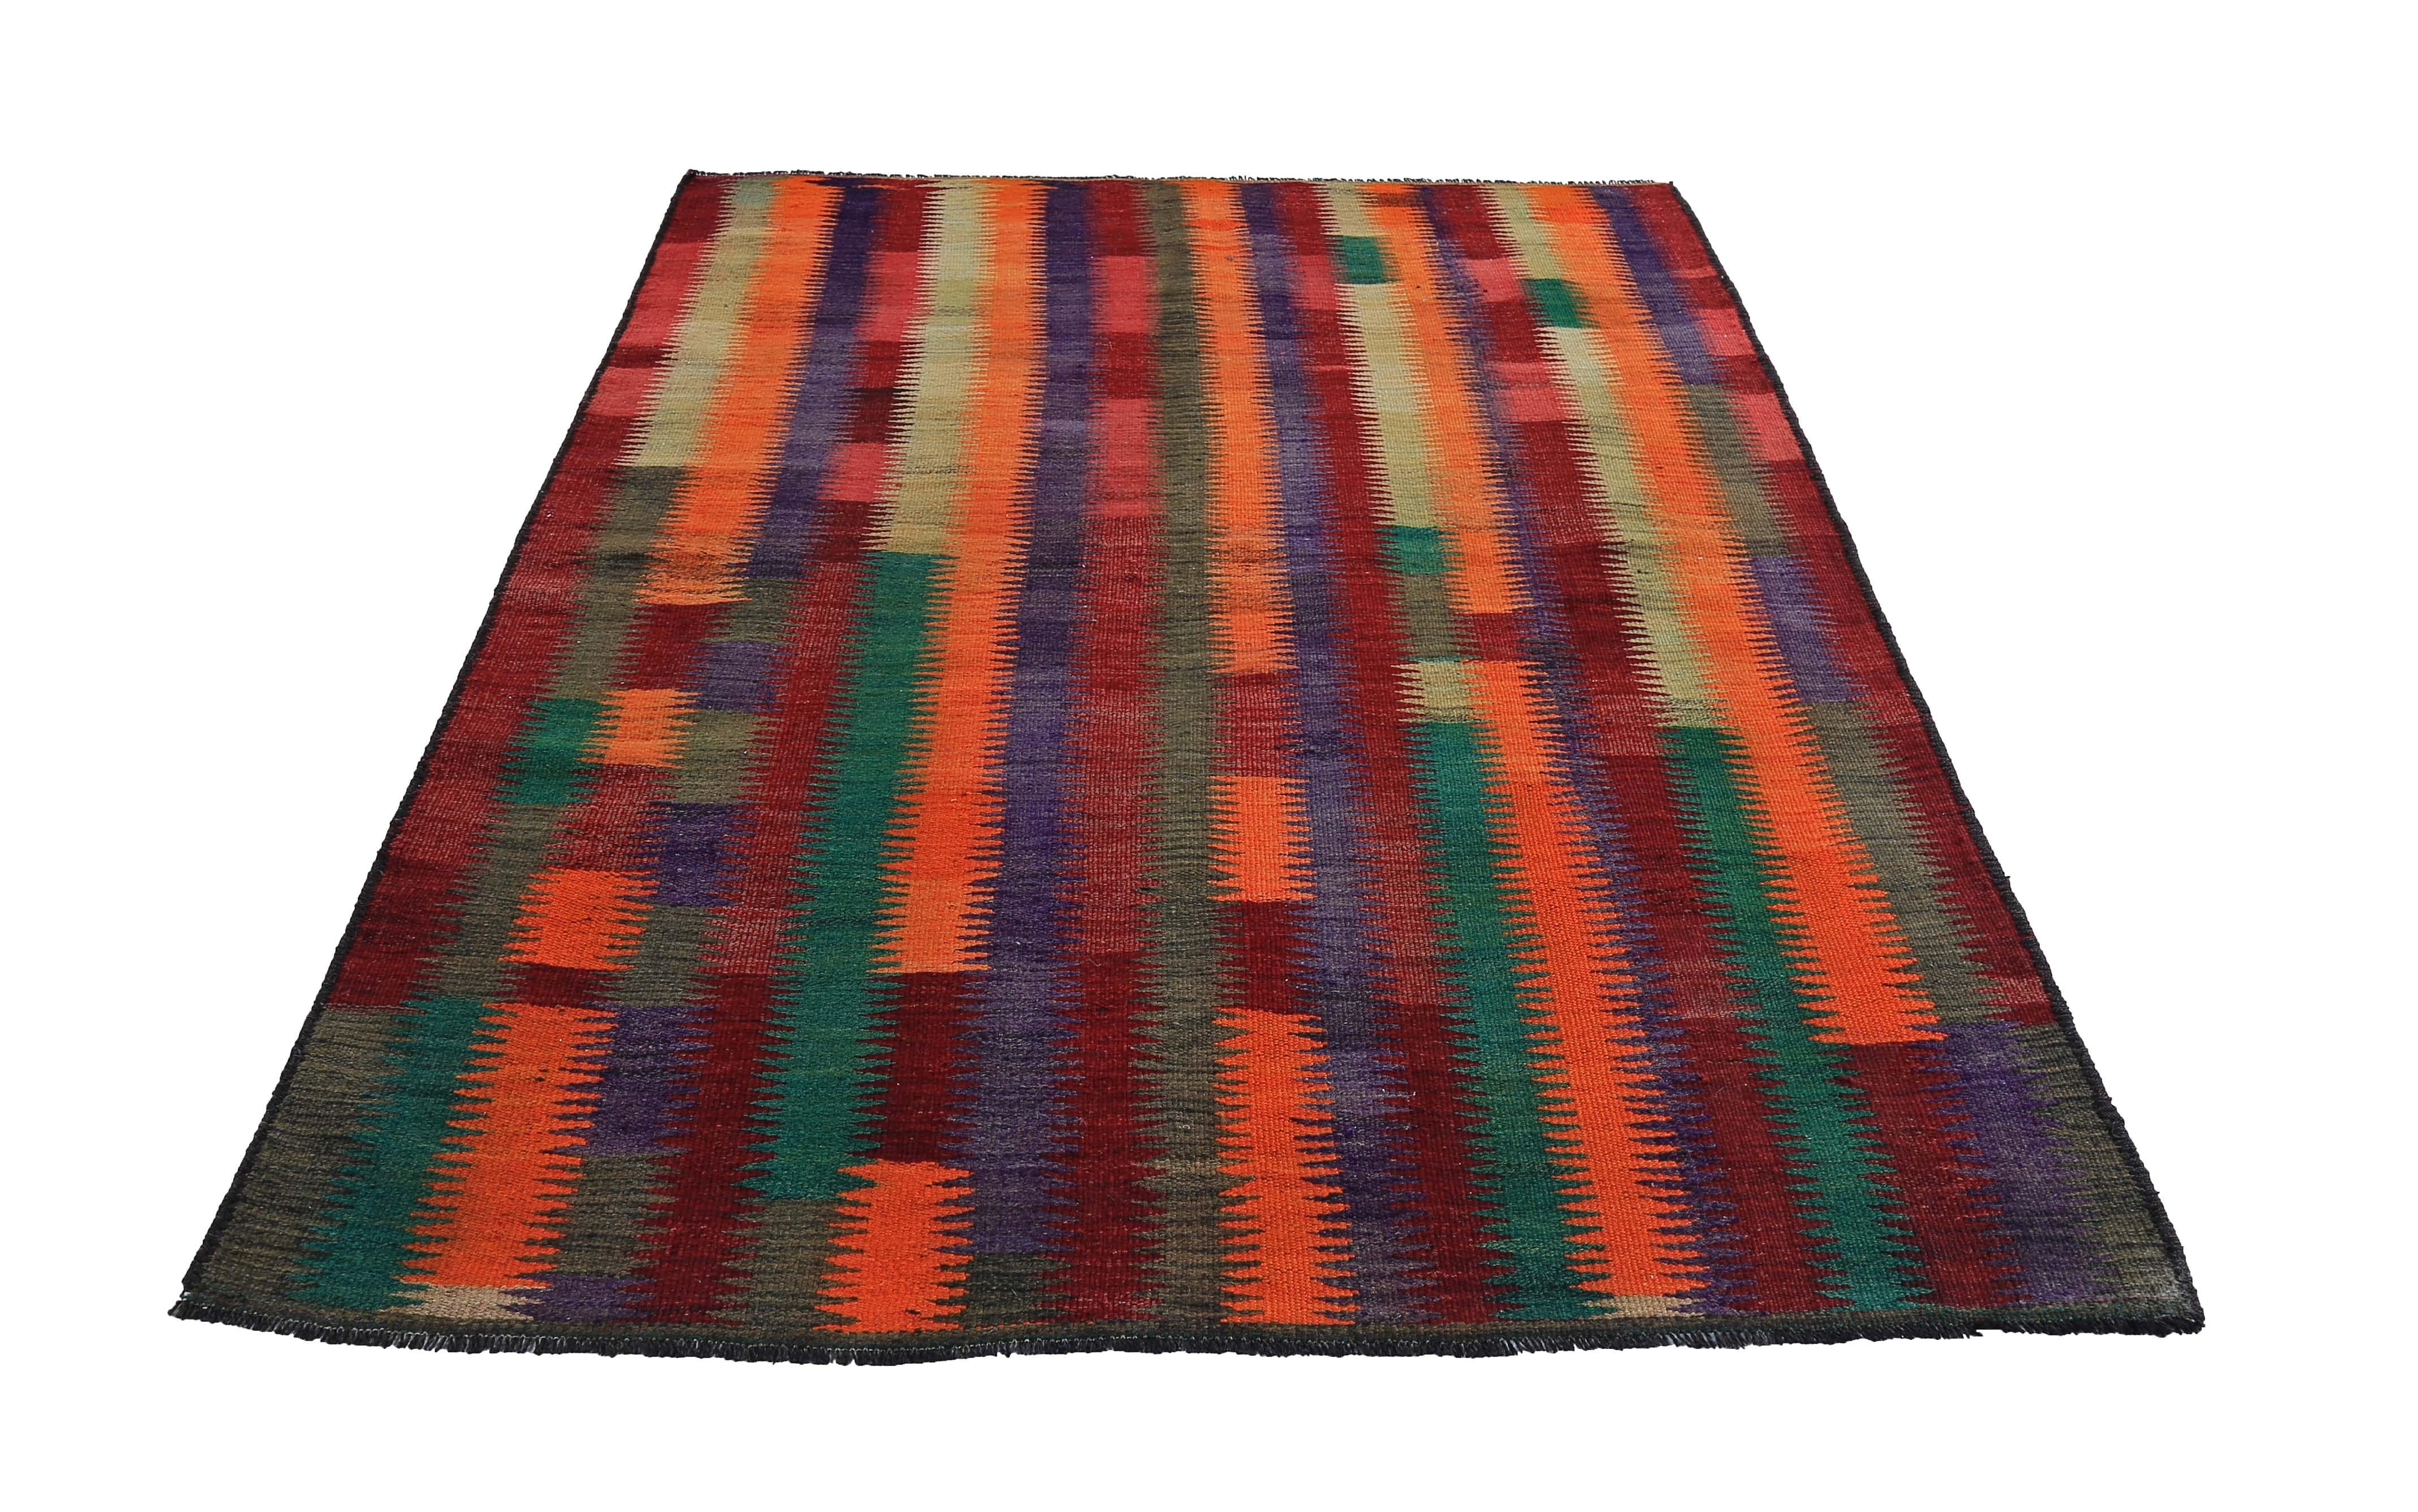 Turkish rug handwoven from the finest sheep’s wool and colored with all-natural vegetable dyes that are safe for humans and pets. It’s a traditional Kilim flat-weave design featuring red, orange and green tribal stripes. It’s a stunning piece to get